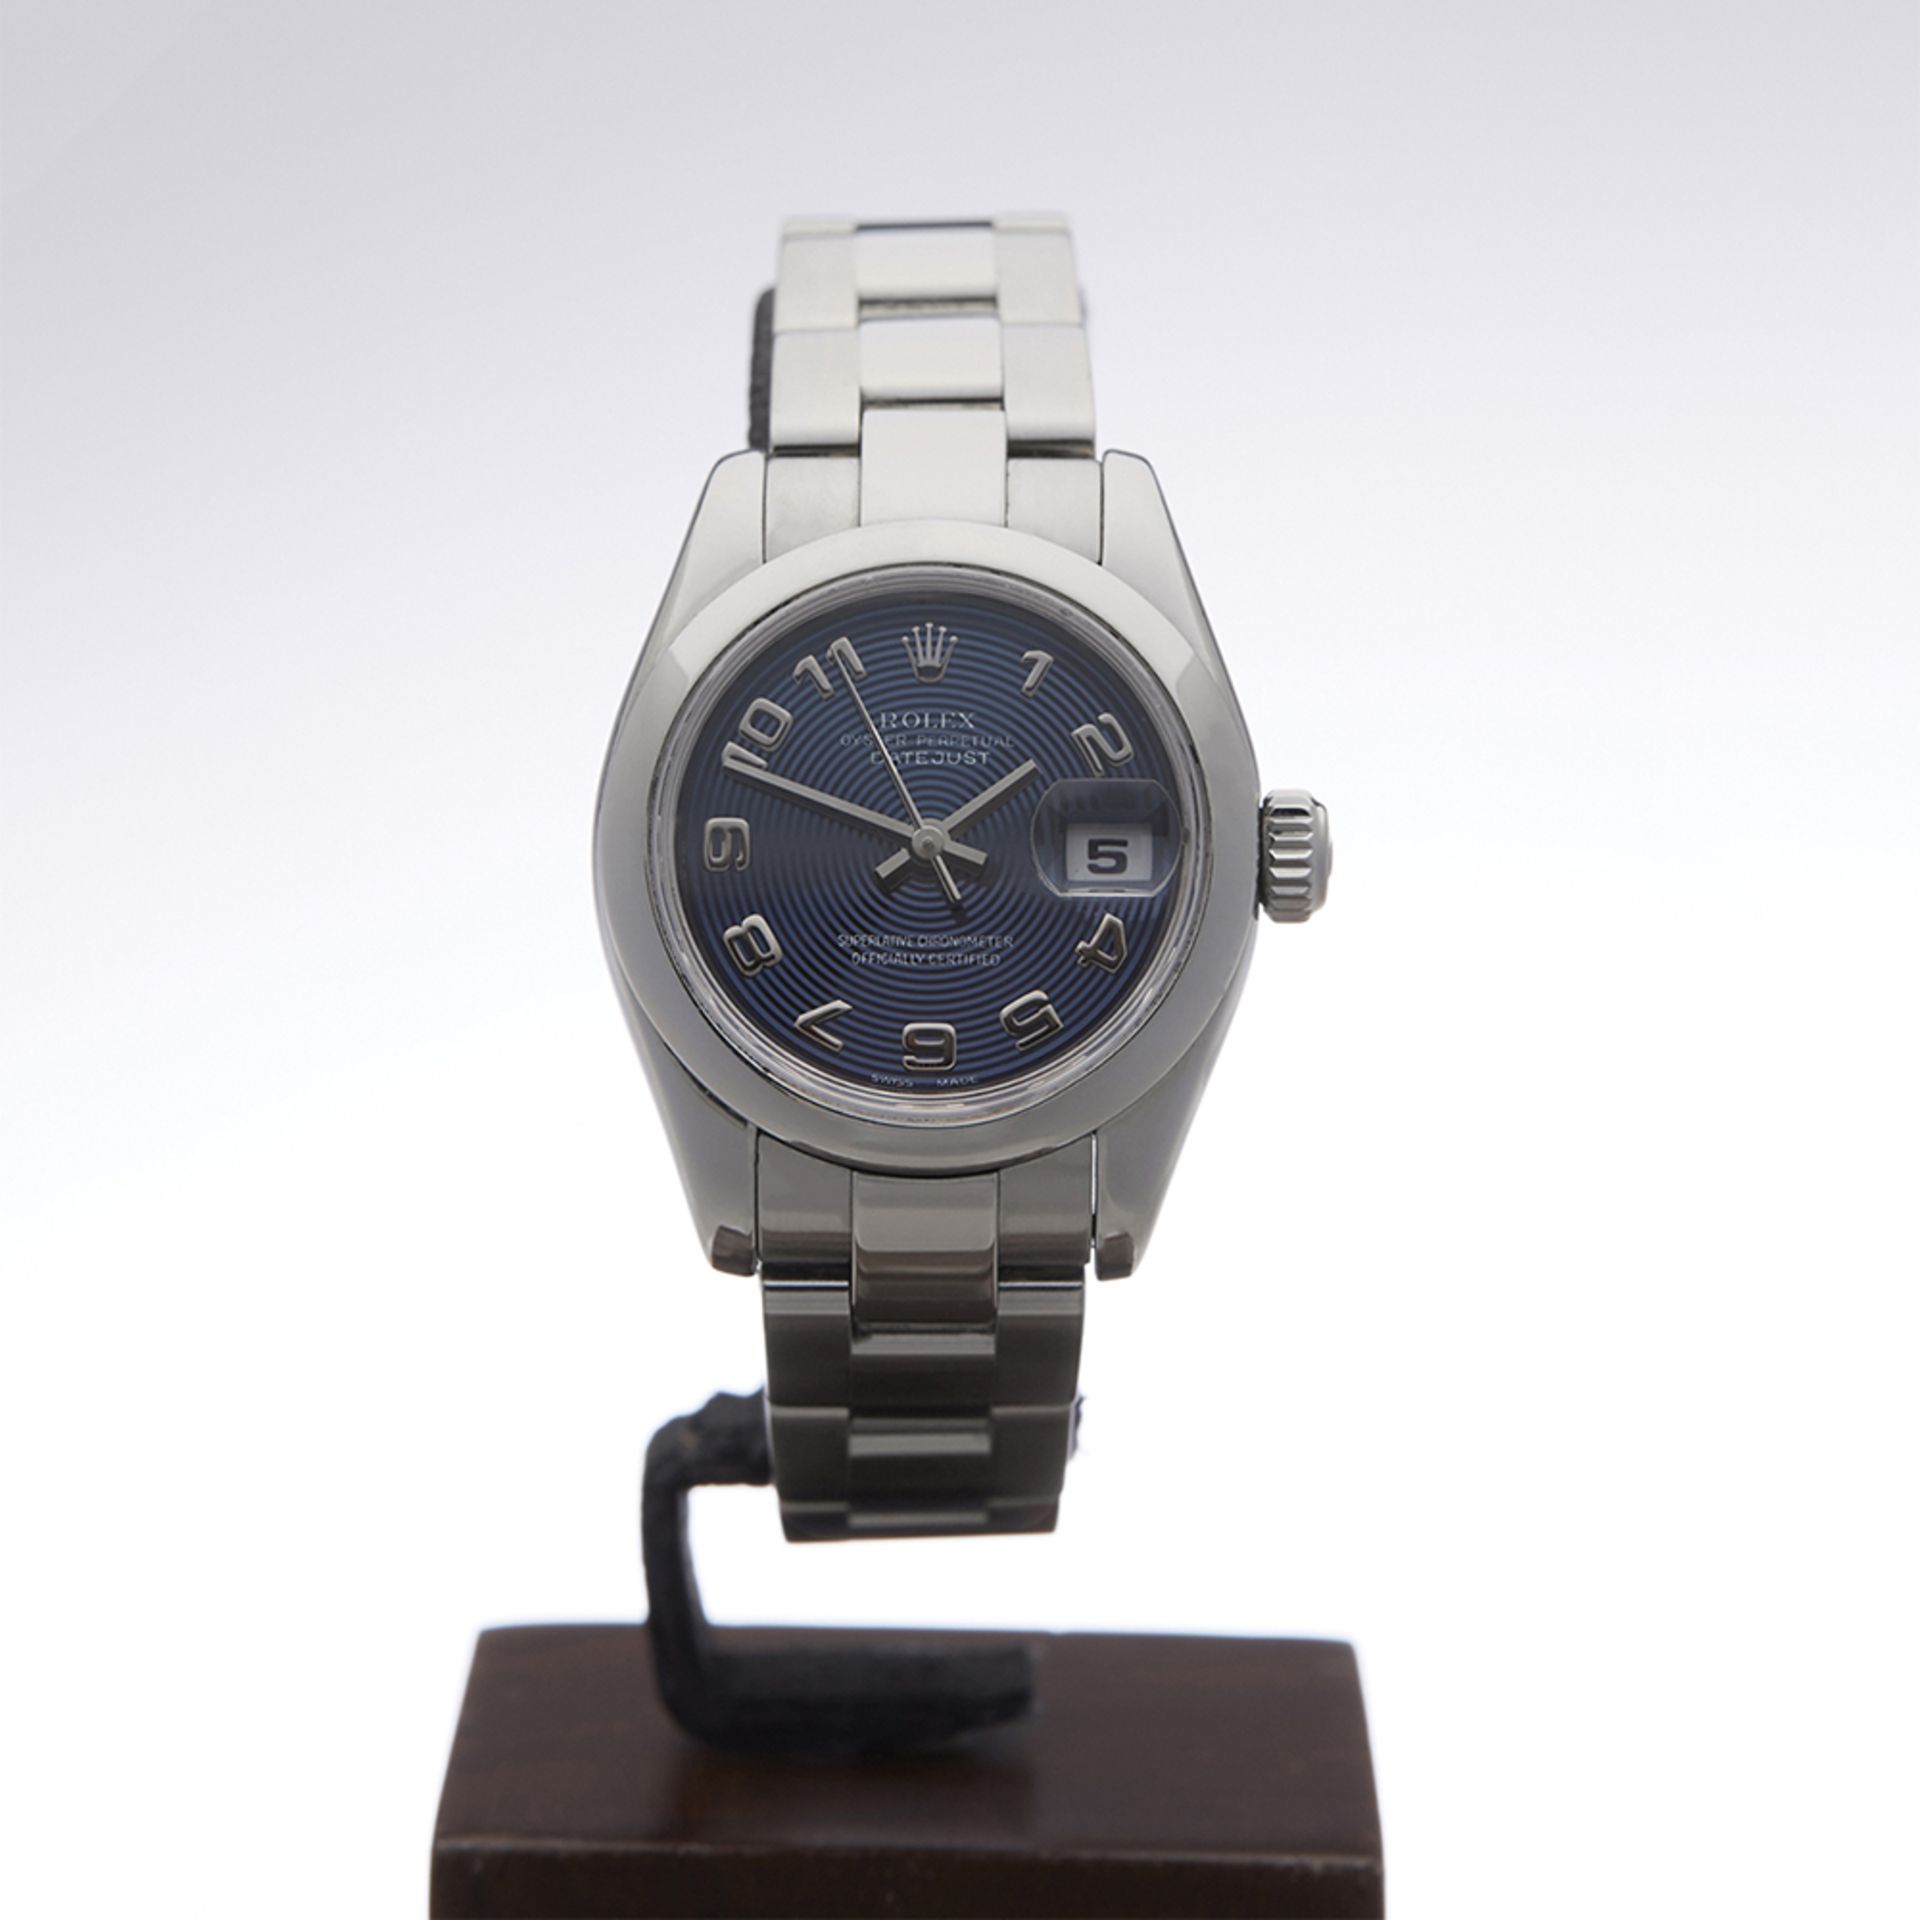 Datejust 26mm Stainless Steel - 179160 - Image 2 of 9